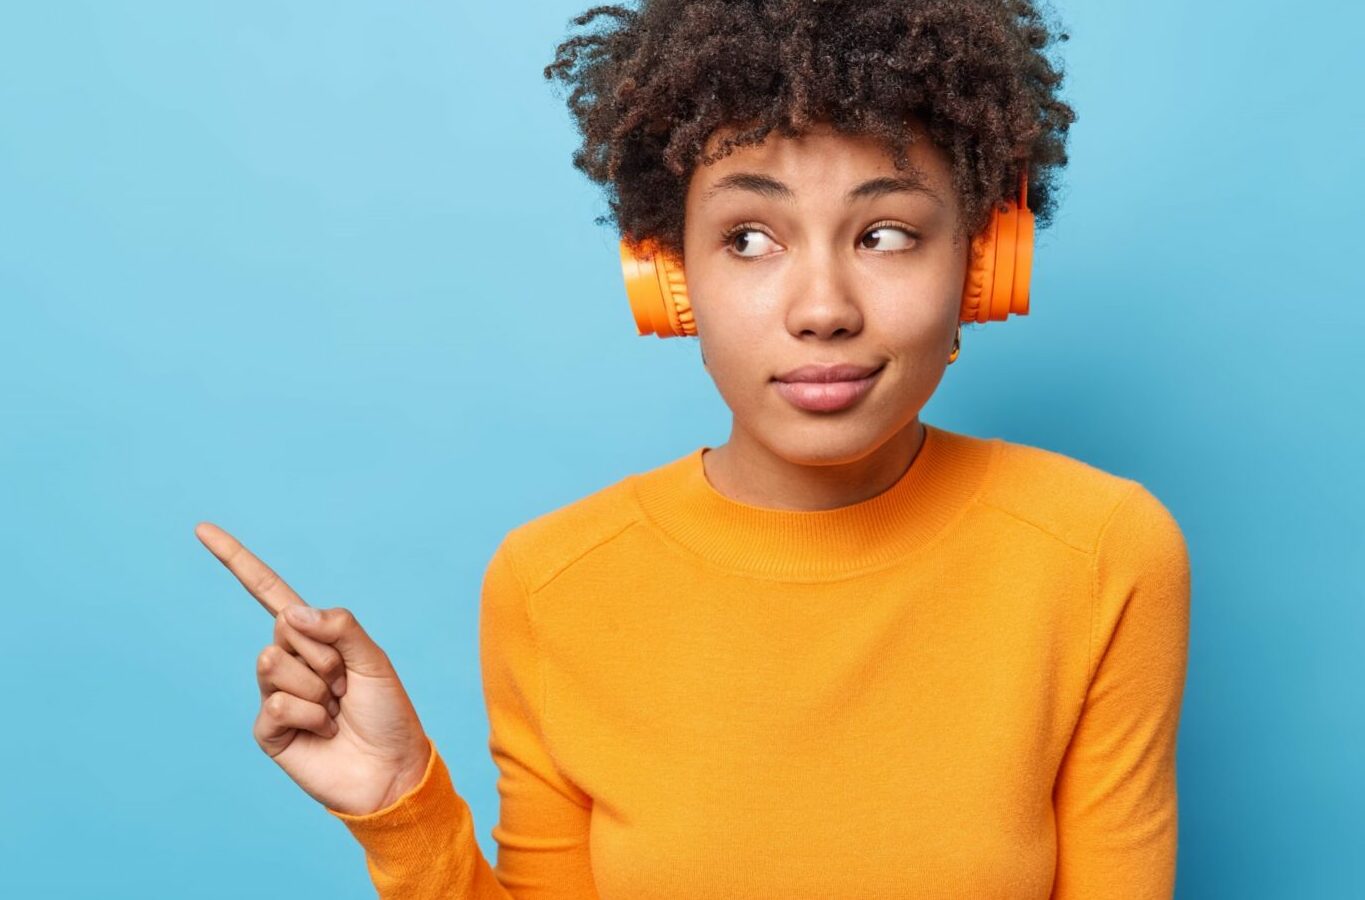 How do you get the most out of audio advertising?